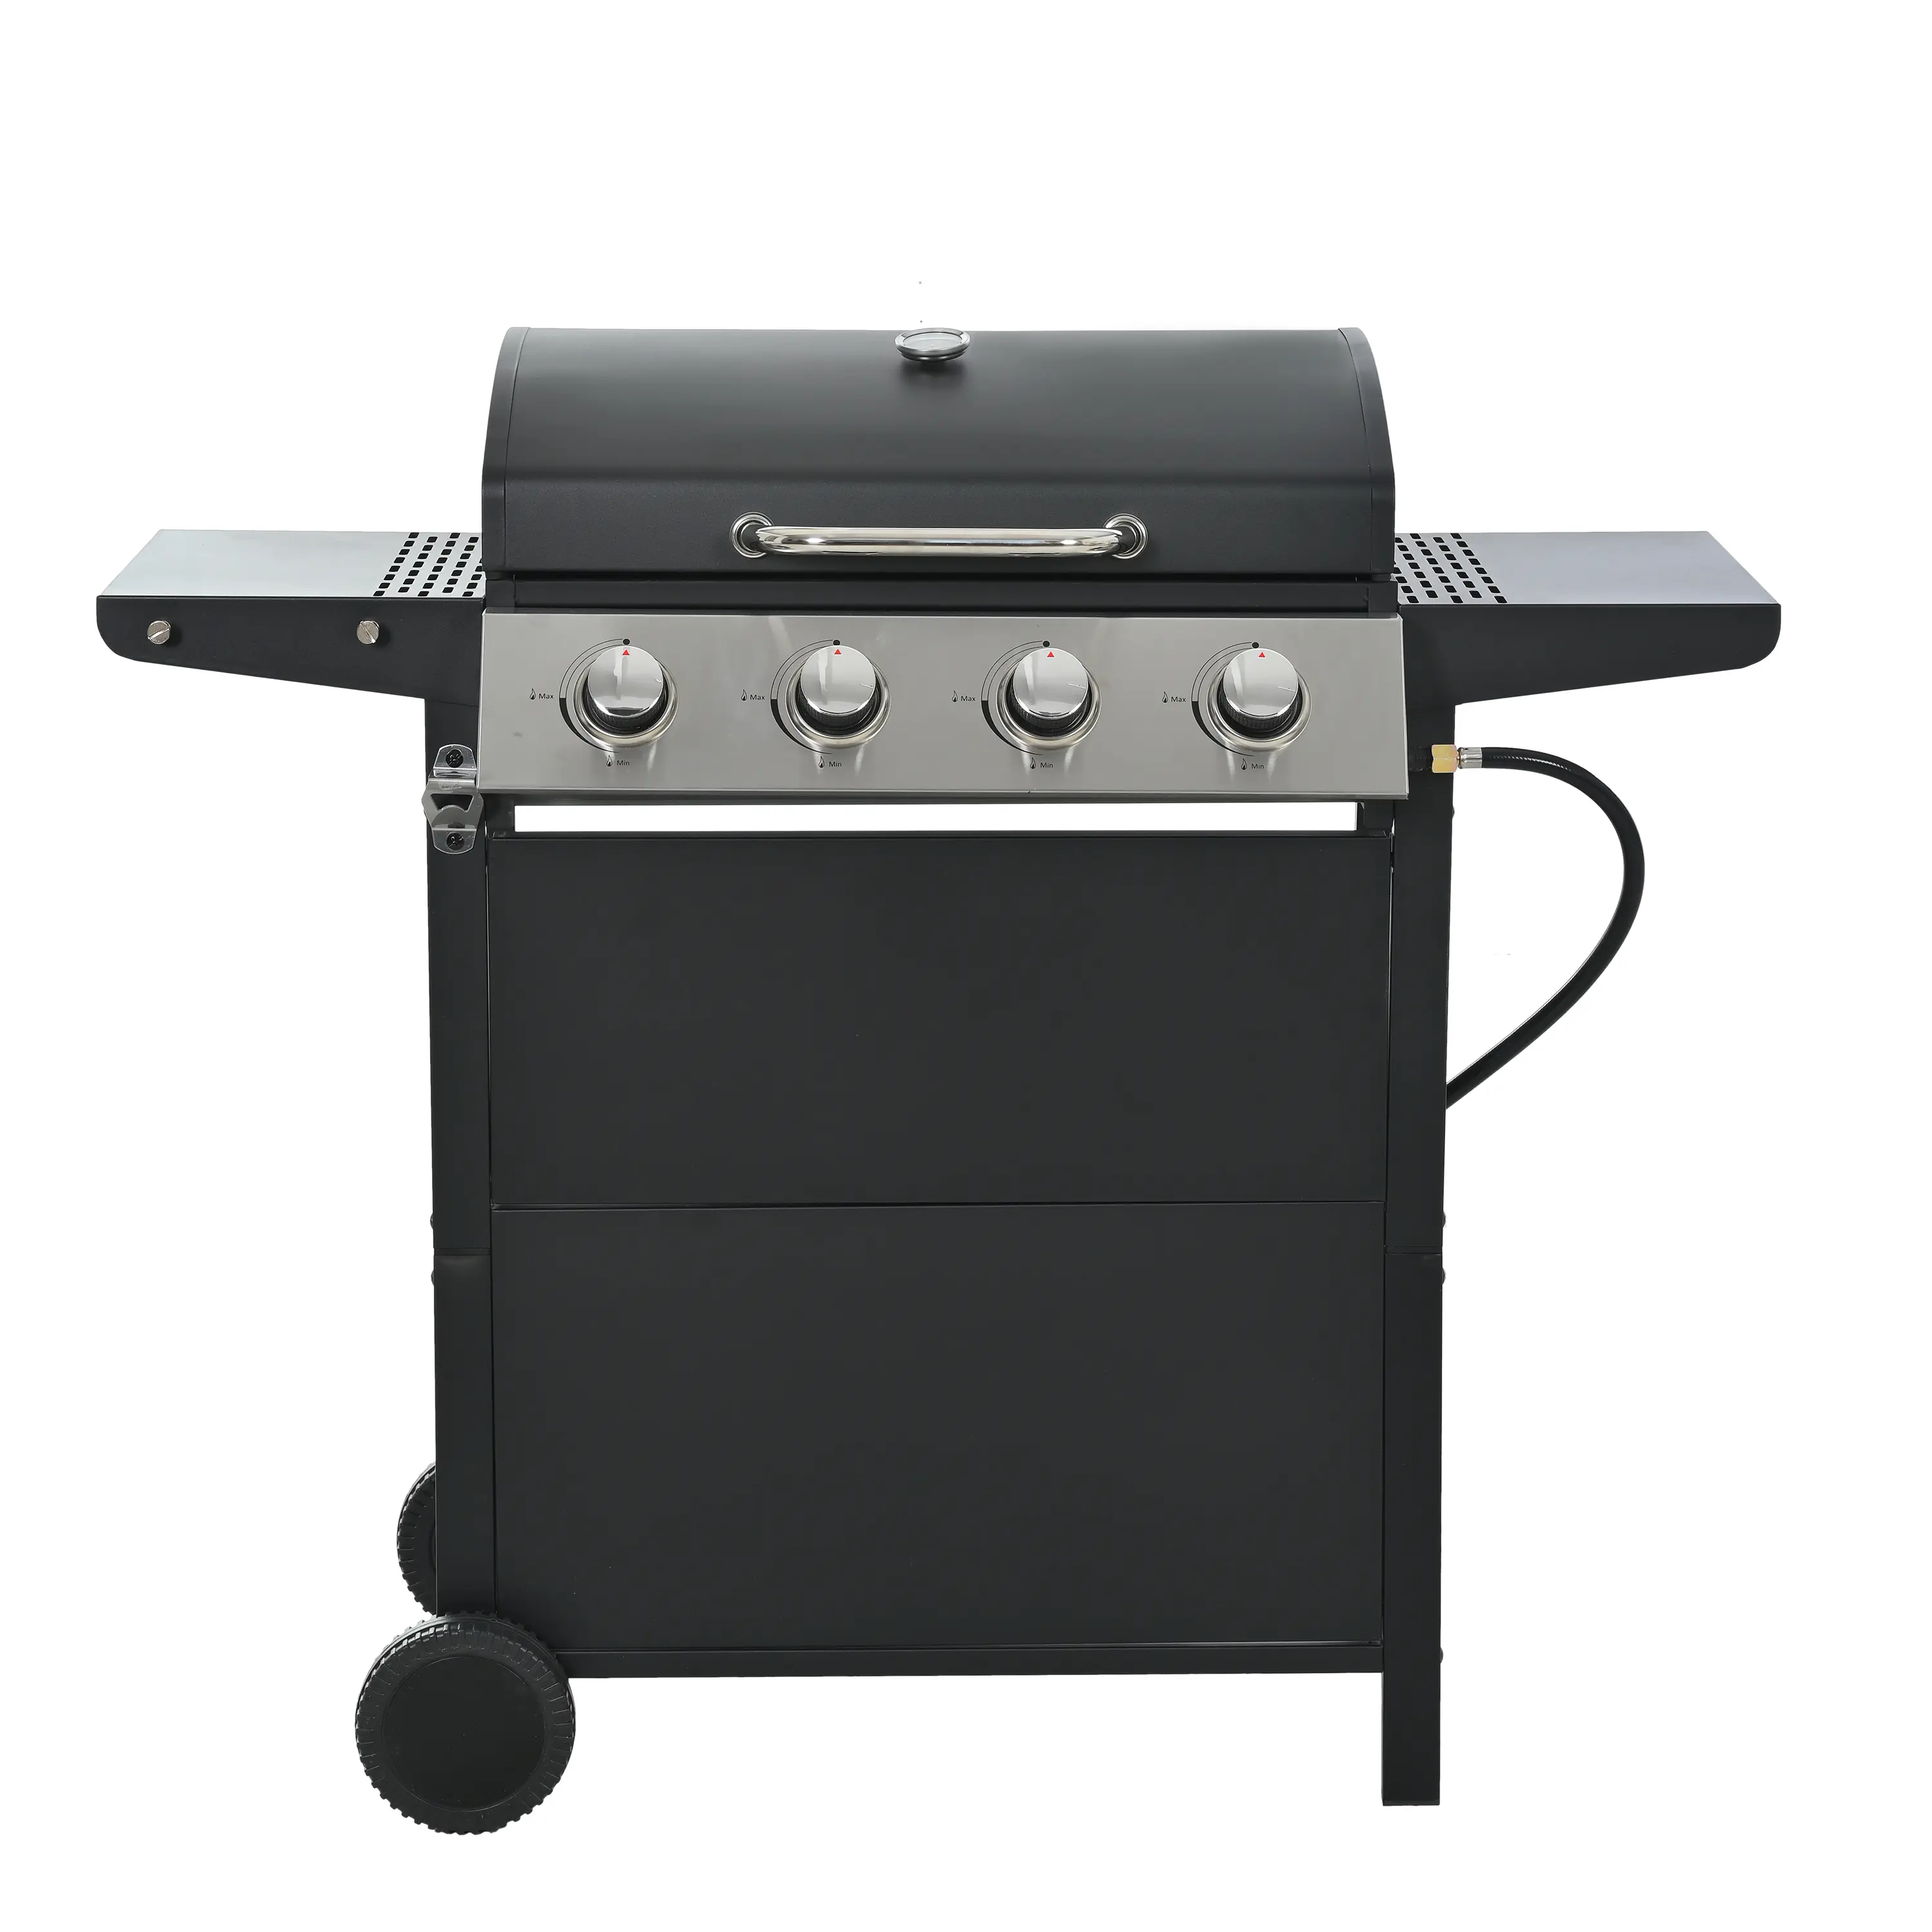 4-Burner Propane Gas Grill Stainless Steel BBQ for Outdoor